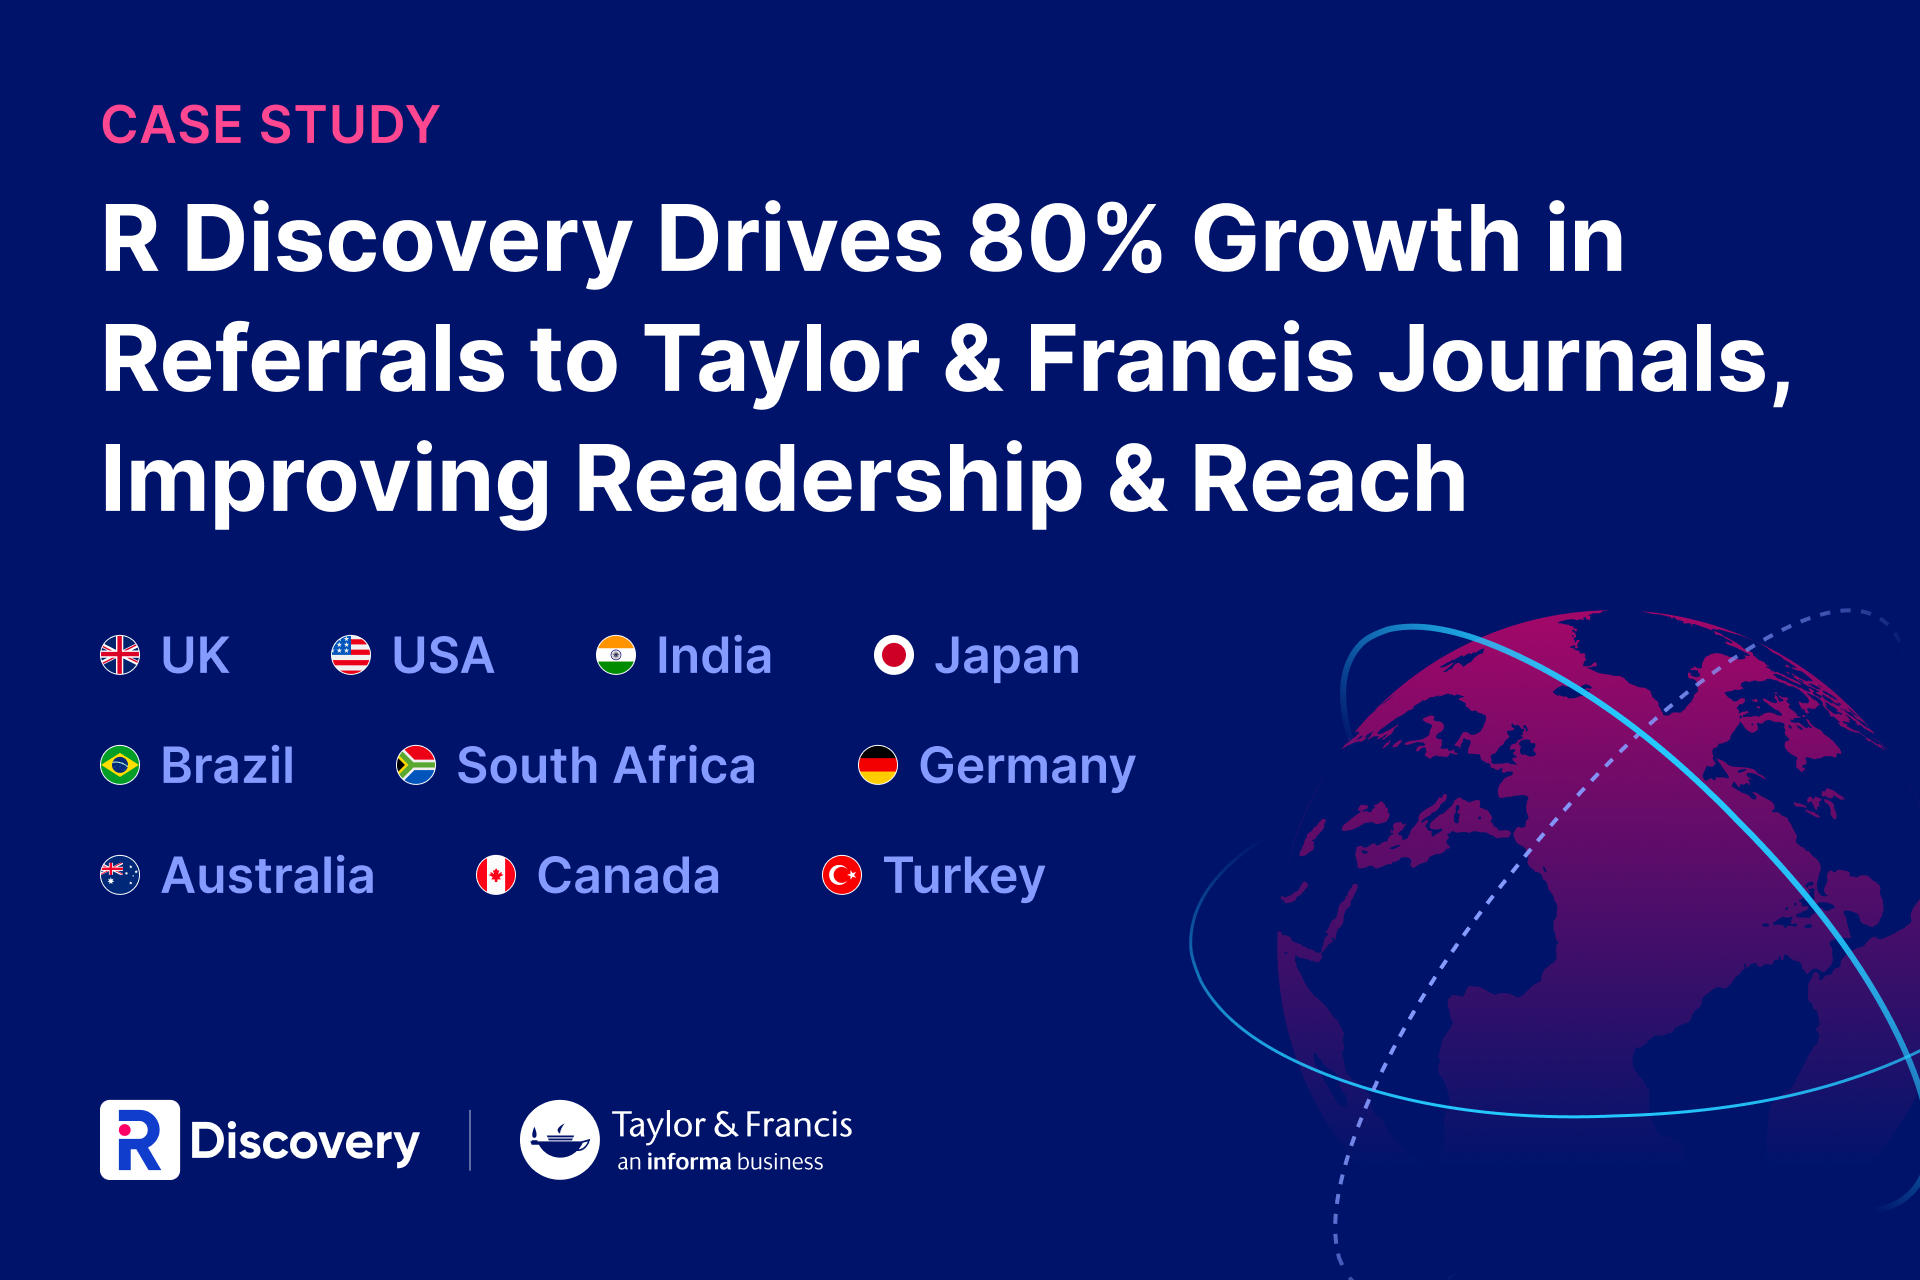 R Discovery Drives 80% Growth in Referrals to Taylor & Francis Journals, Improving Readership and Reach